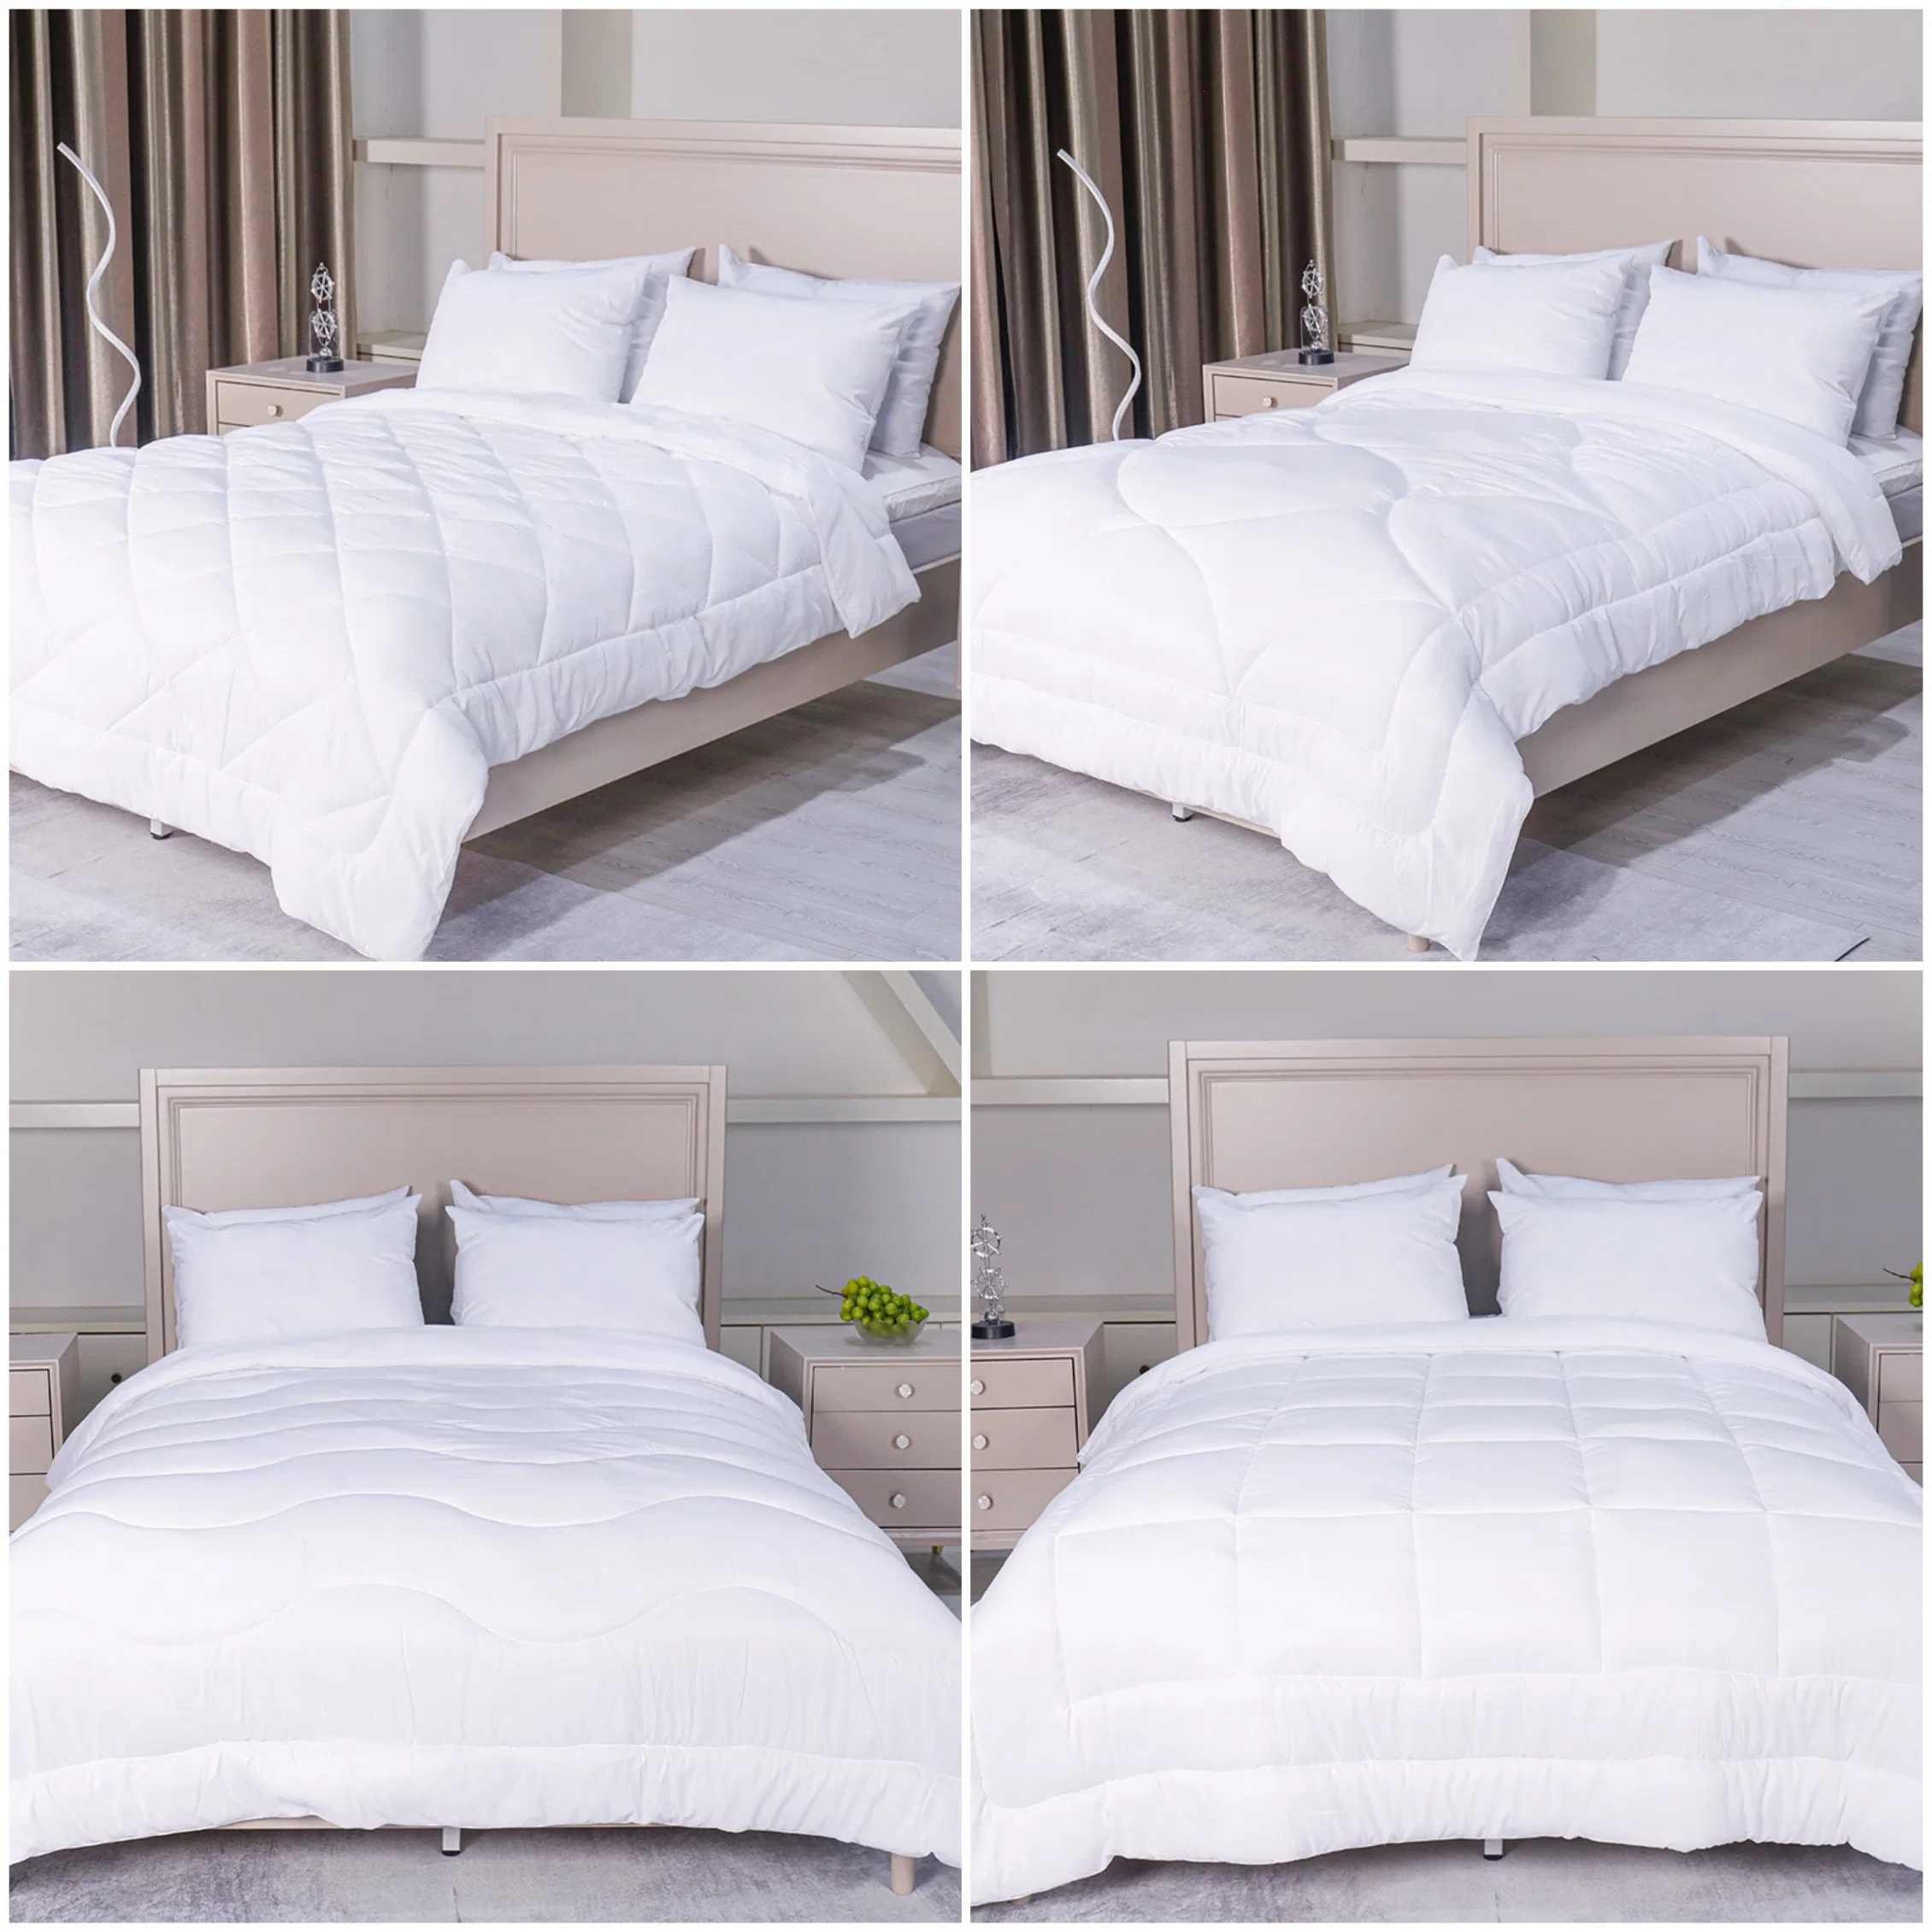 China Manufacturer Home Textile Nice Quality Cheap Price All Seasons Wholesale/Supplier New Stitching Design White Hotel Microfiber Polyester Quilted Fluffy Duvet